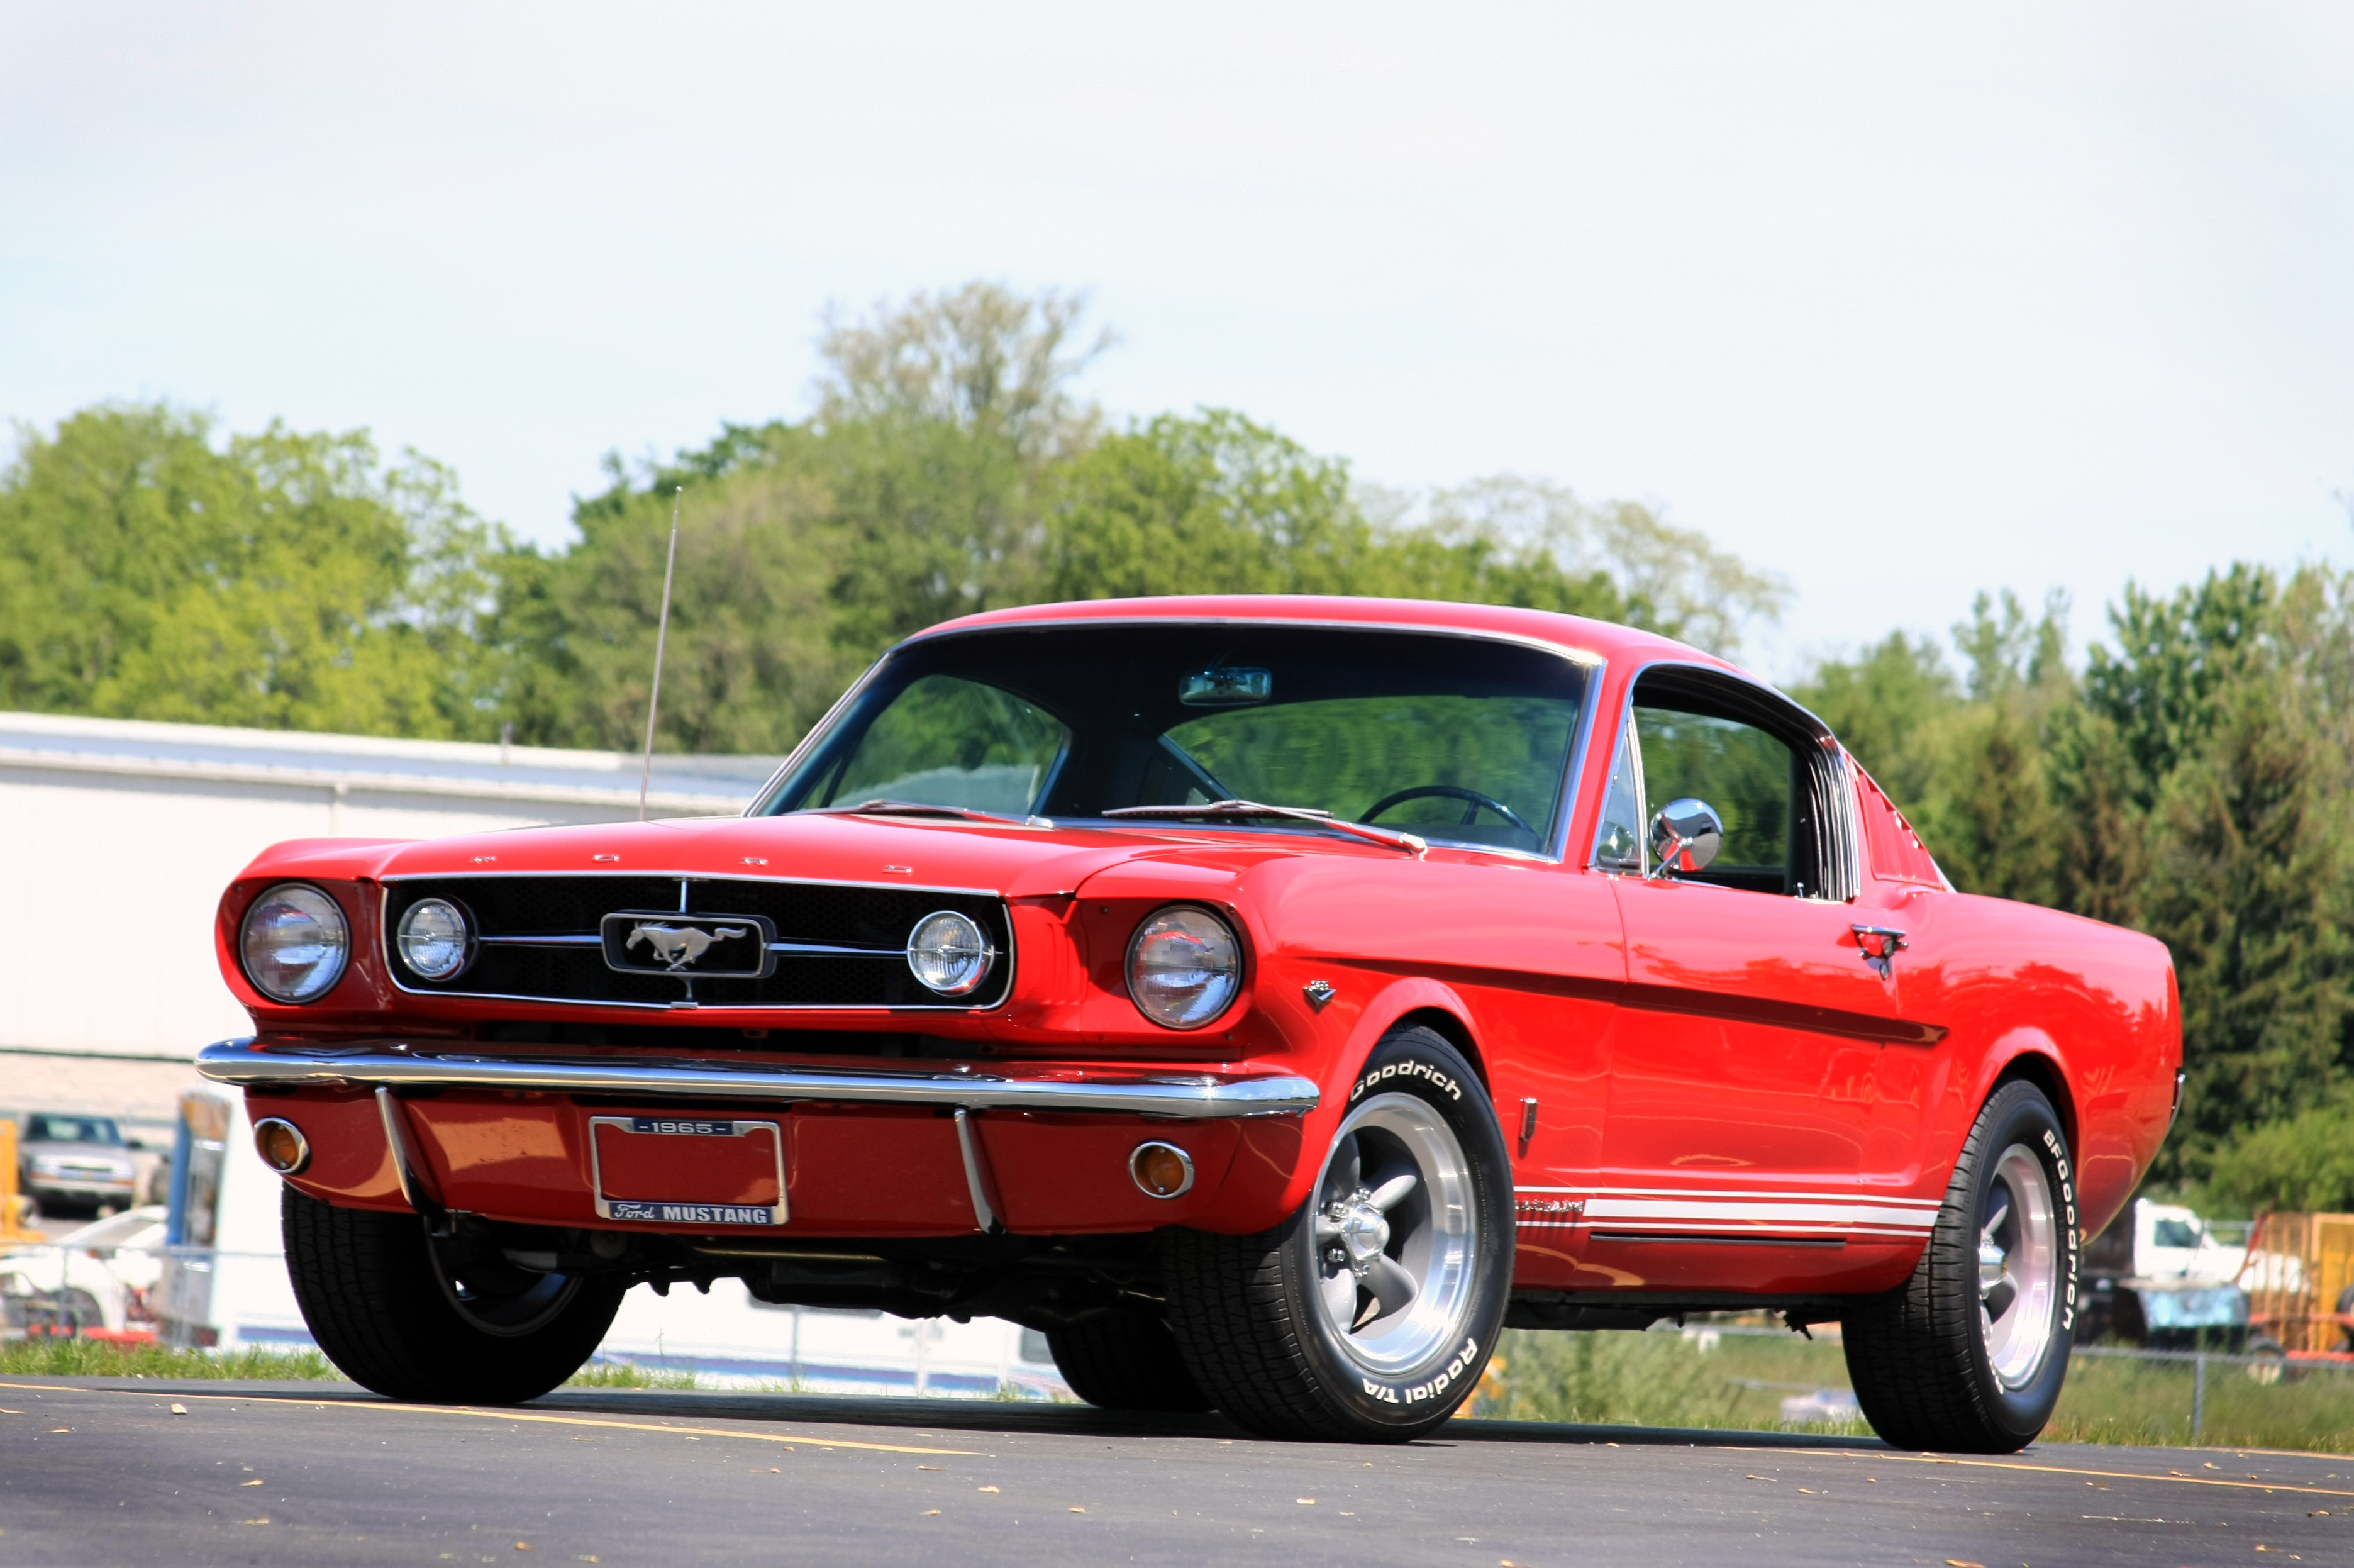 1965 Ford Mustang Fastback Mustang Muscle Cars Ford Mustang